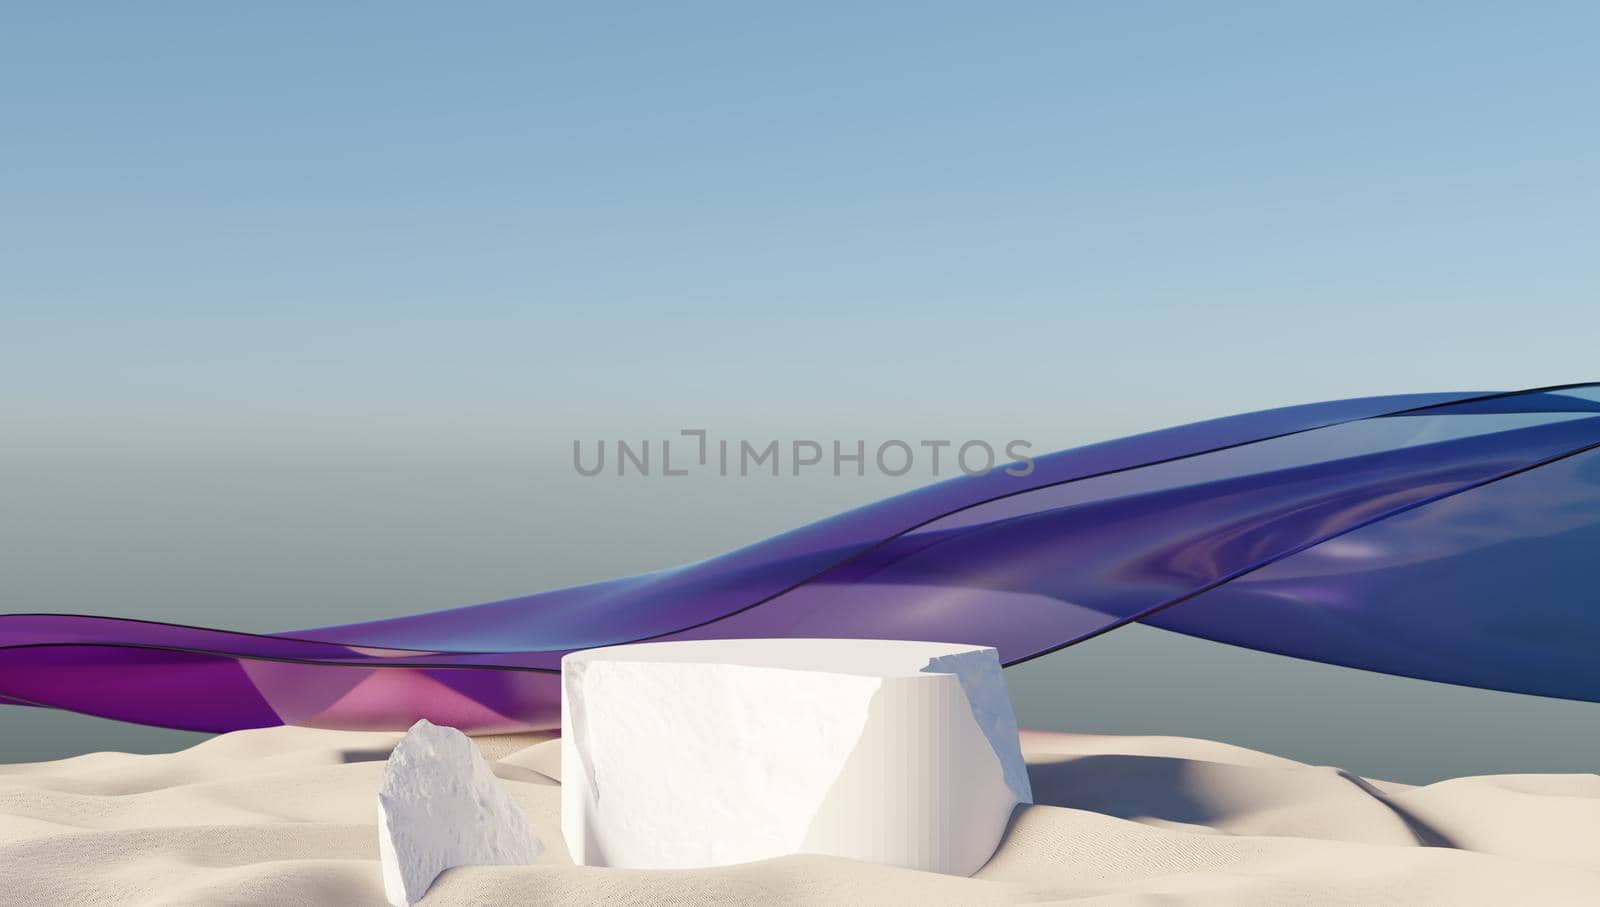 3d rendering of modern minimal cylindrical podium on a desert landscape. Showcase with platform for product displaying